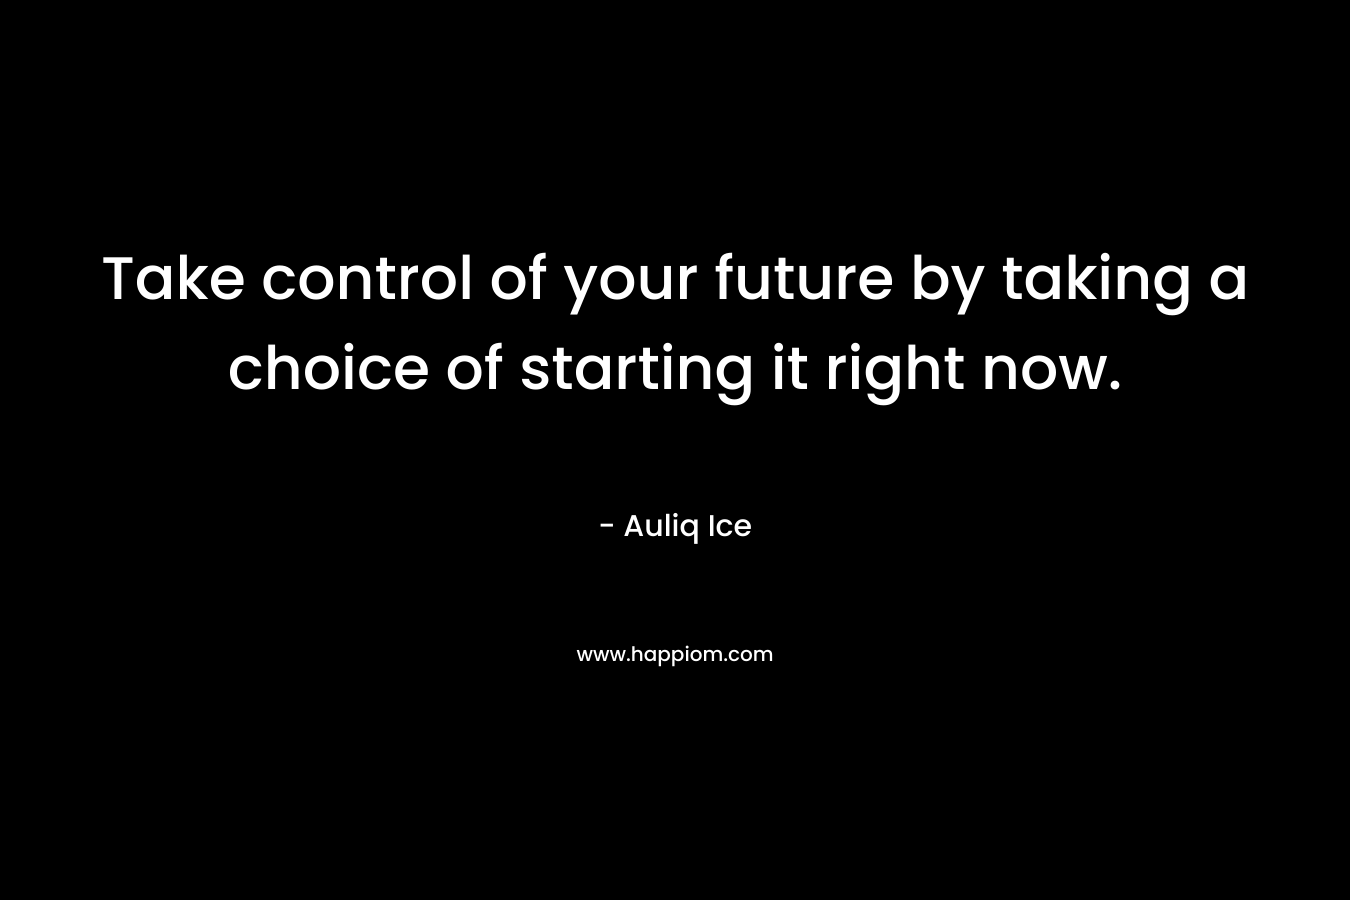 Take control of your future by taking a choice of starting it right now.